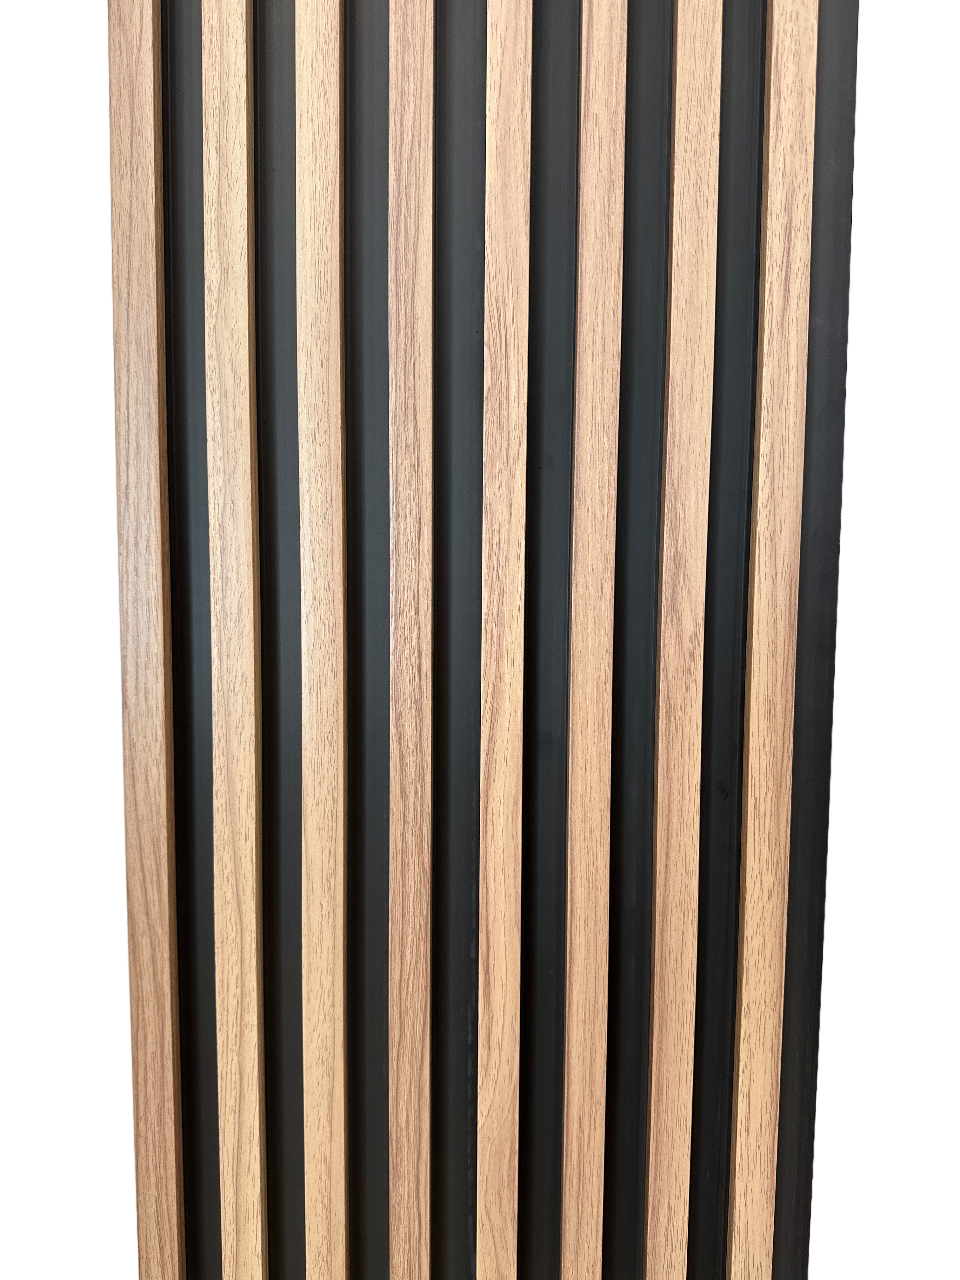 Interior Accent Wall Panels WPC Two Tone Black / Light Brown Teak Wood Decorative Look